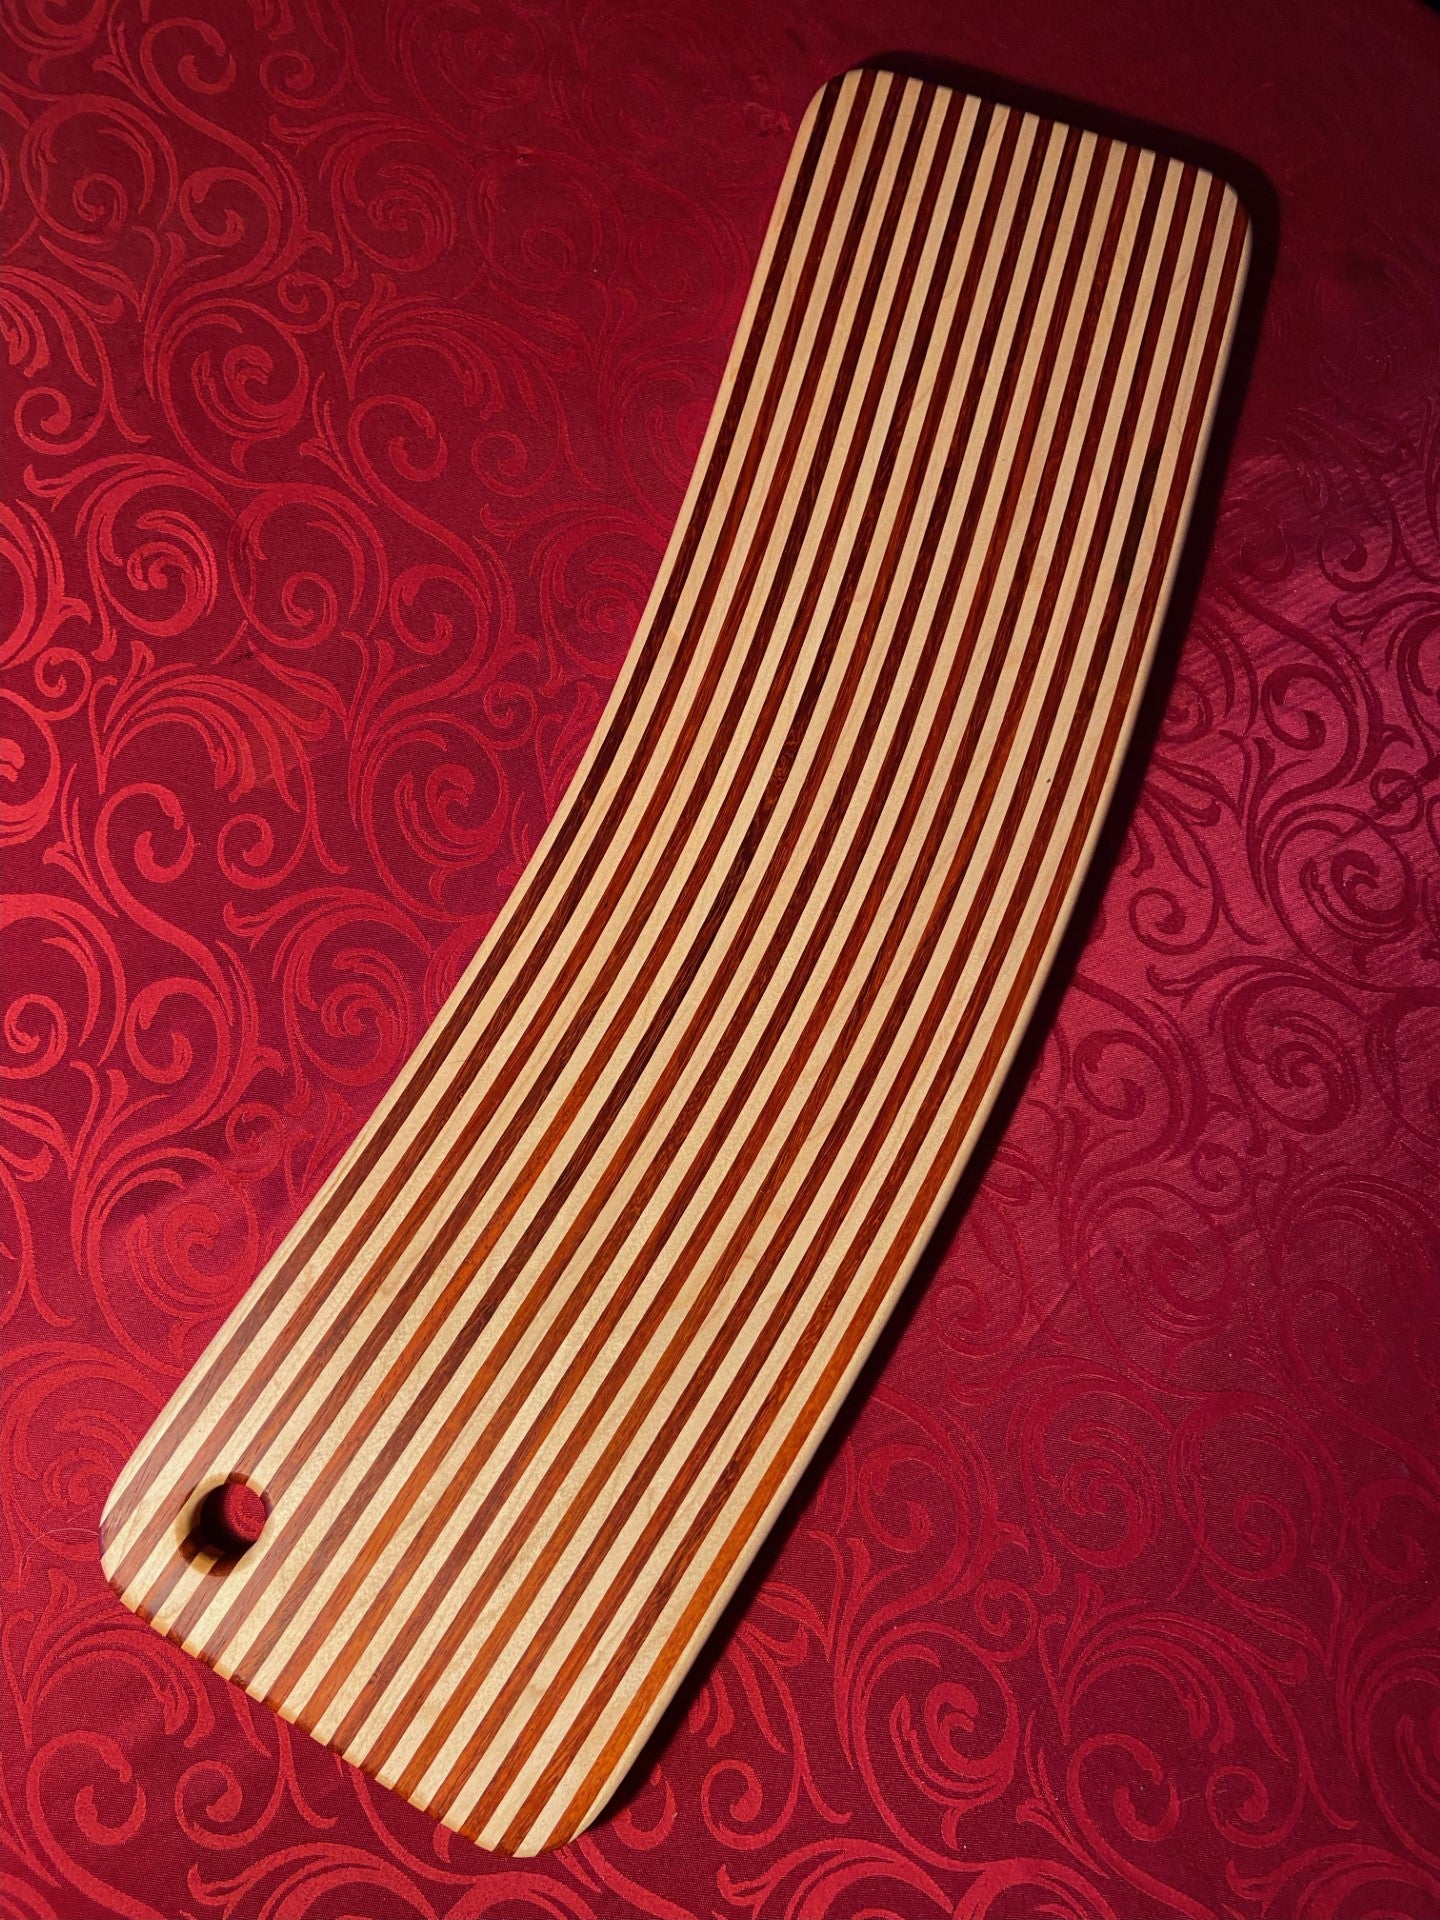 Bent Candy Cane Charcuterie Board